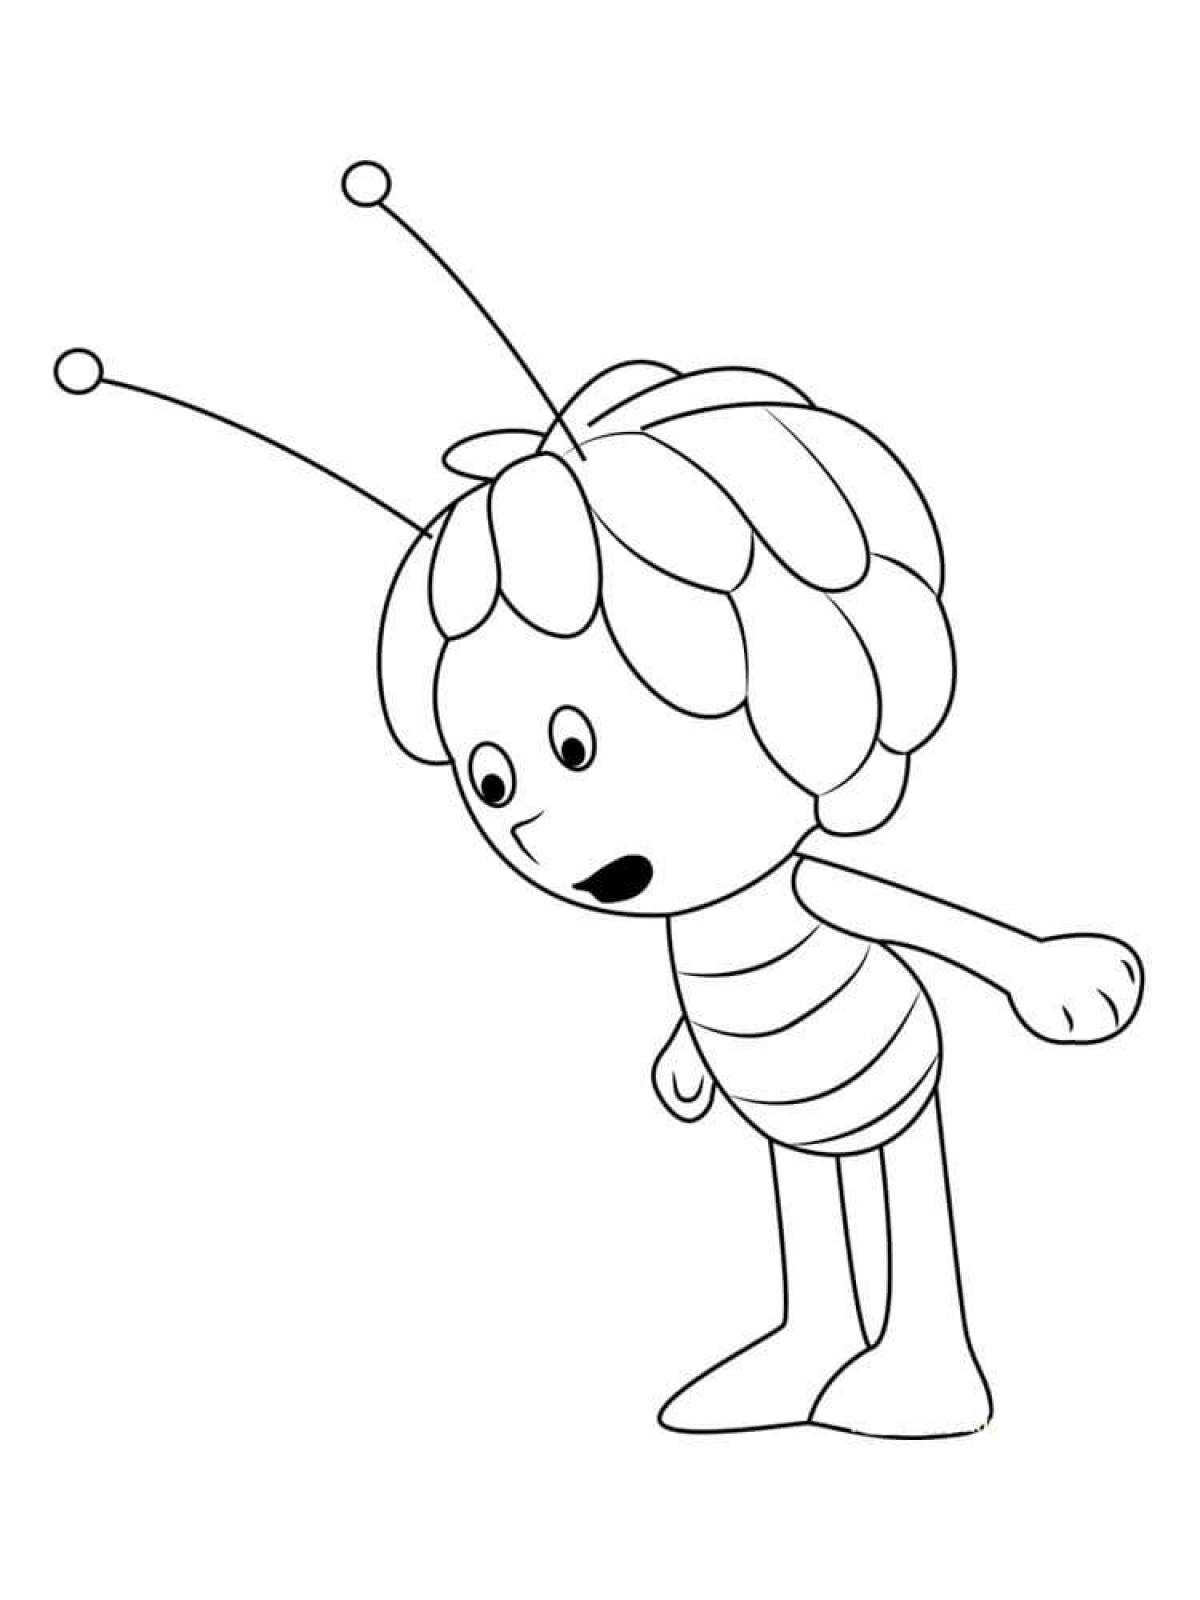 Smiling bee coloring page